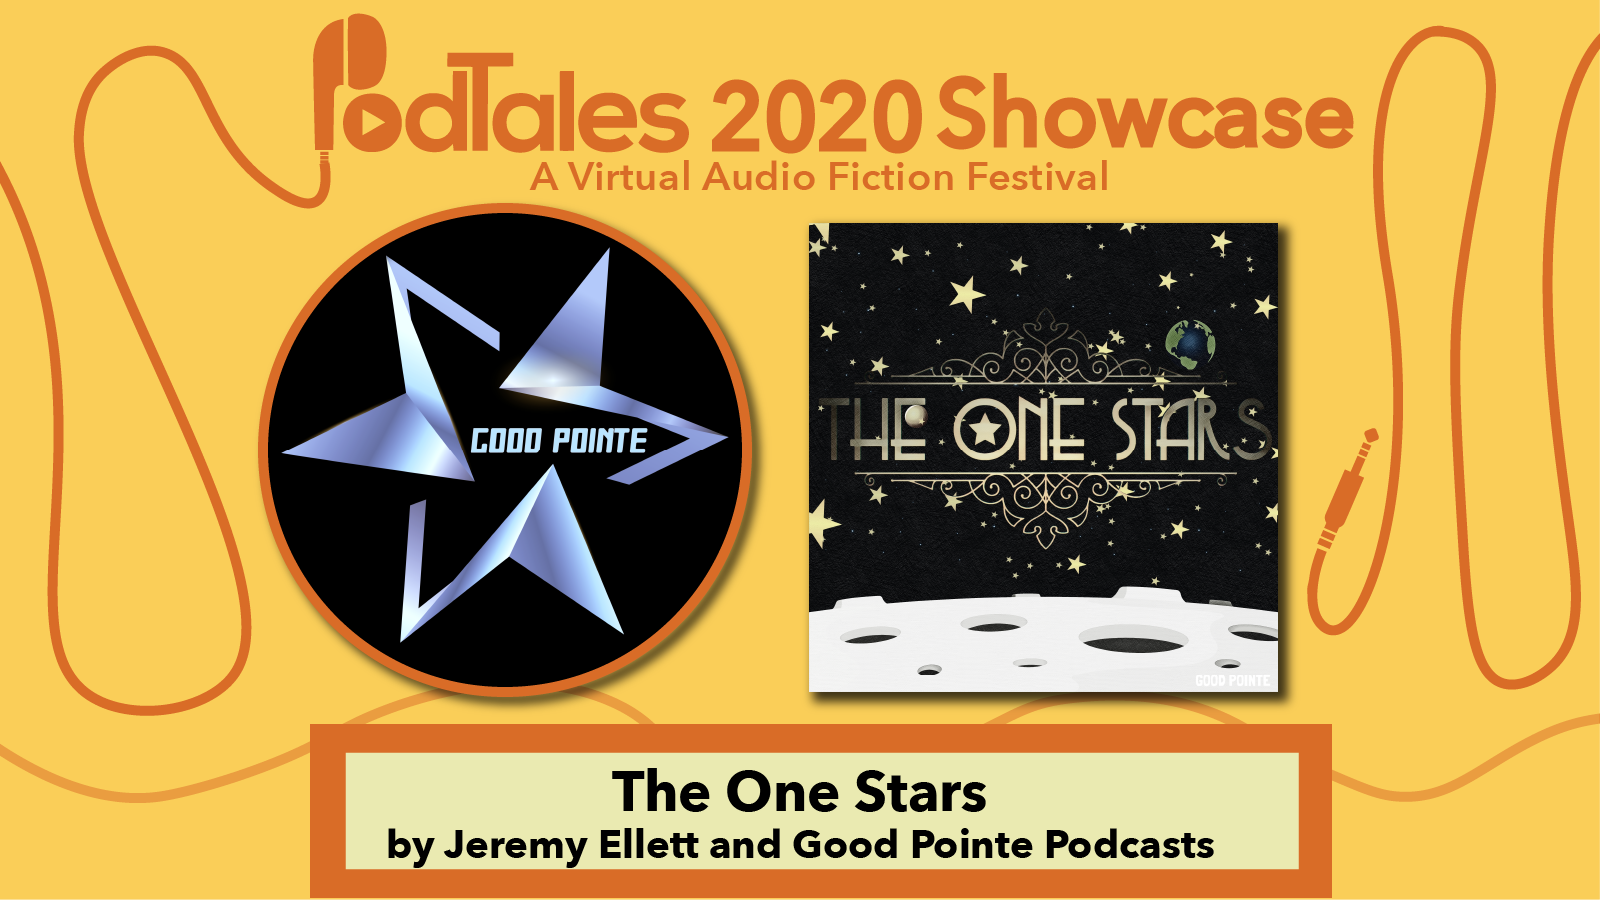 Text reading “PodTales 2020 Showcase: A Virtual Audio Fiction Festival”, Good Point Podcasts Logo, Show Art for The One Stars, Text reading “The One Stars by Jeremy Ellet and Goode Pointe Podcasts”